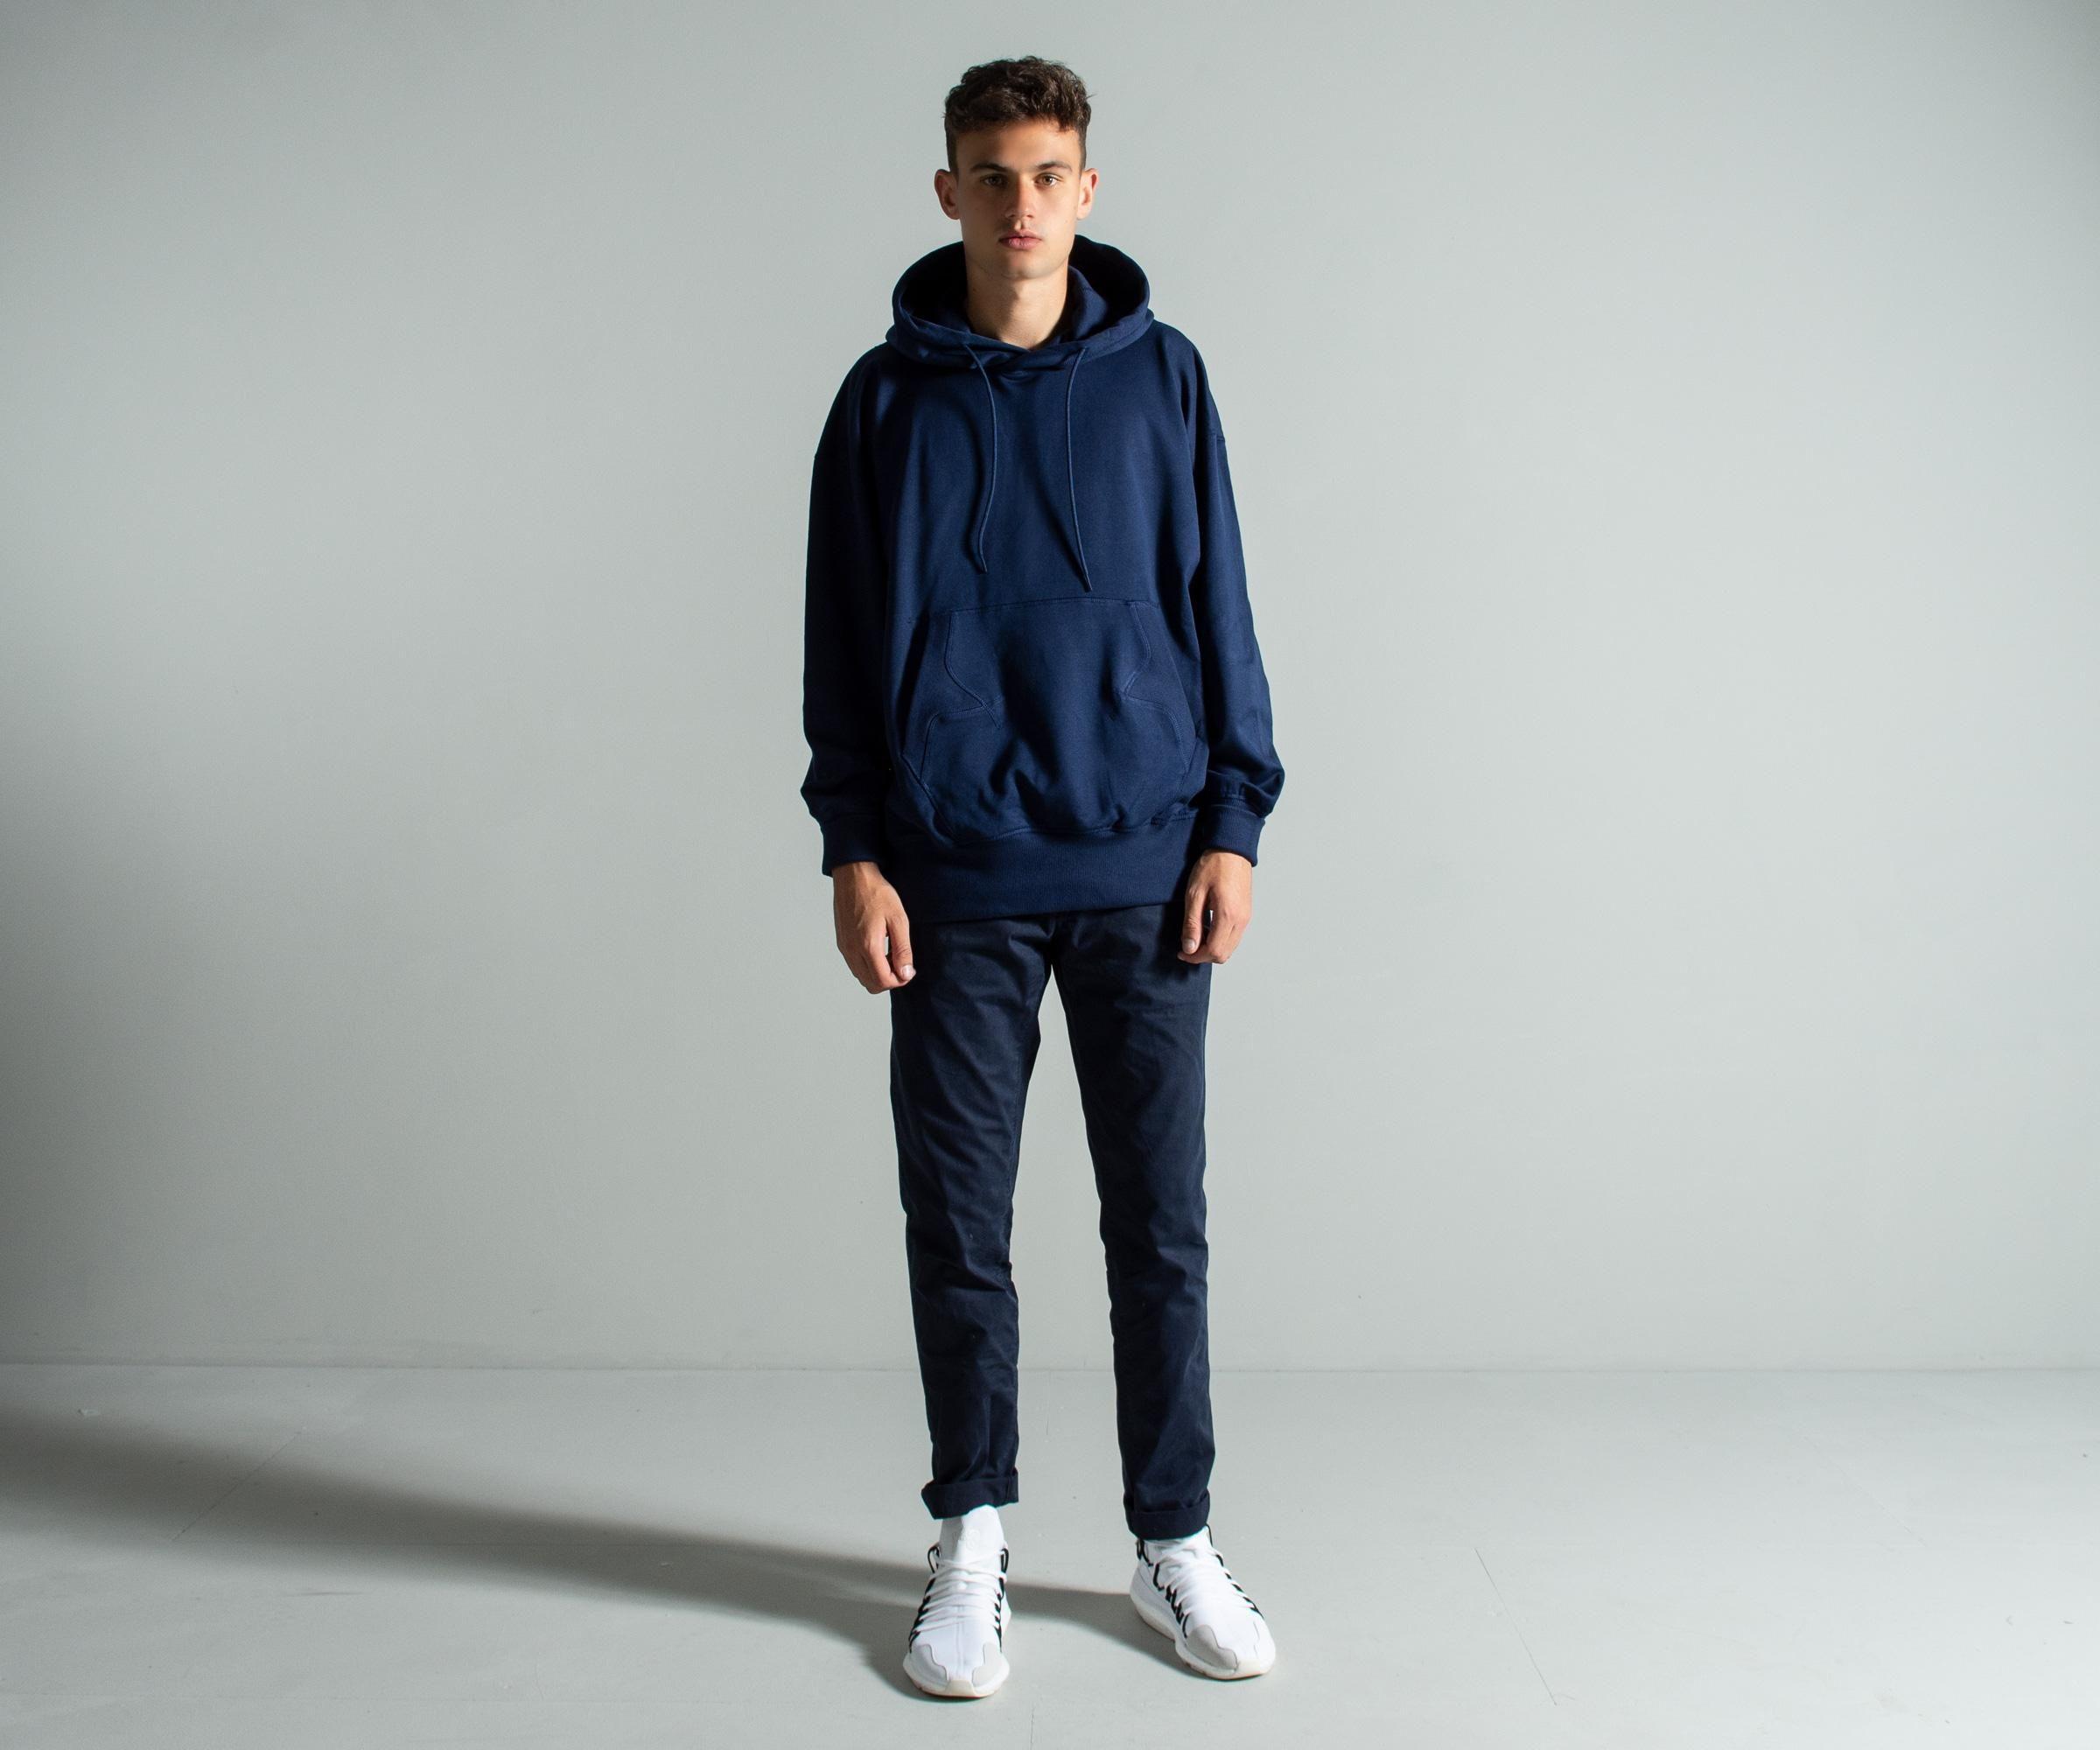 3 Blue Person Logo - Y-3 Oversized Stacked Logo Hoodie Blue in Blue for Men - Lyst